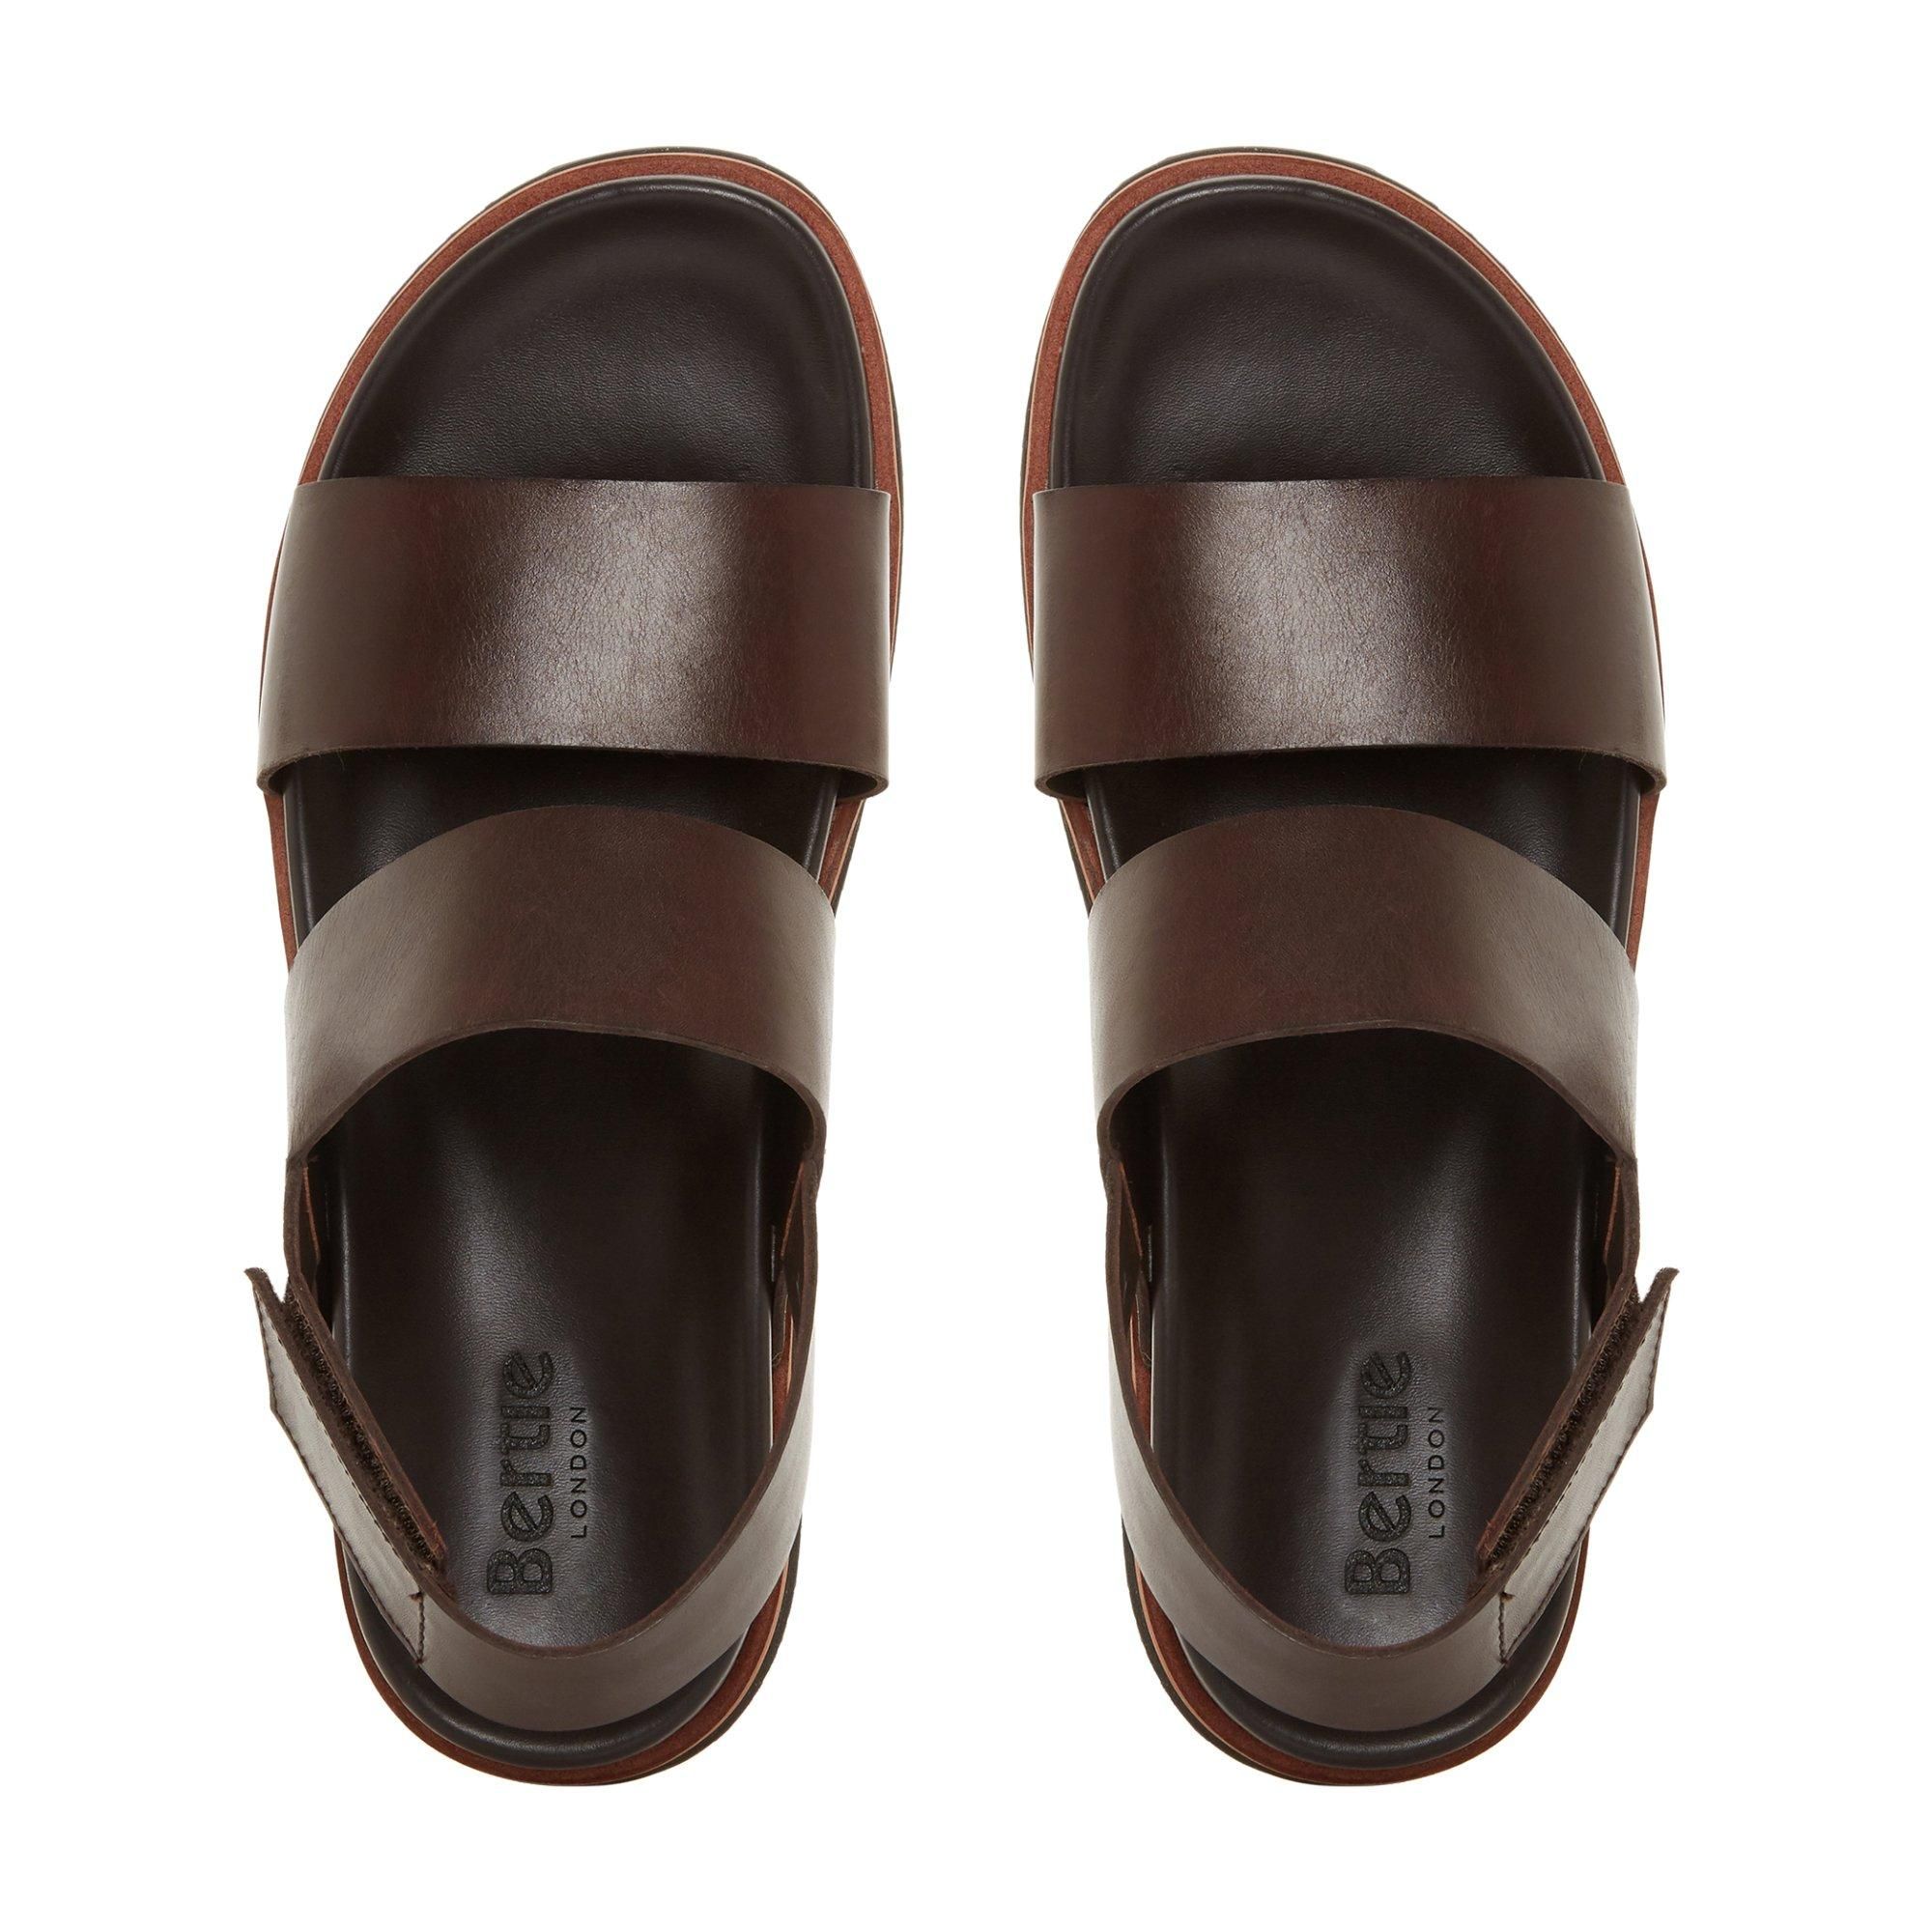 Upgrade your poolside edit with the Irons strap sandal from Bertie. Crafted in smooth leather, it features a sleek double strap design. With a classic wedge sole for style and comfort throughout the day.